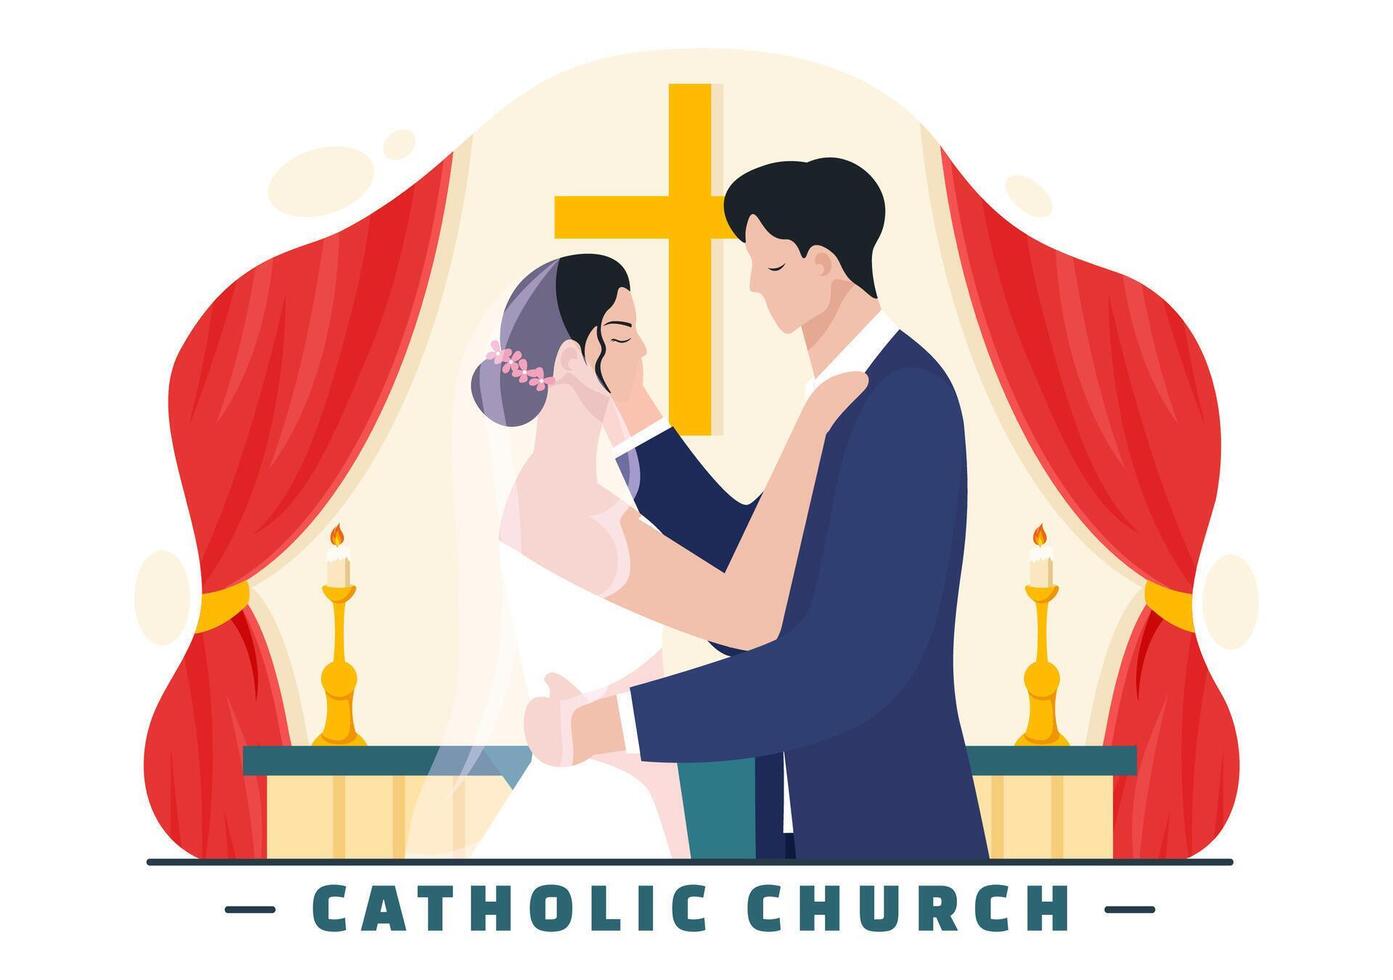 Catholic Church Cathedral as a Sacred Place for Weddings Flat Cartoon Background Vector Illustration